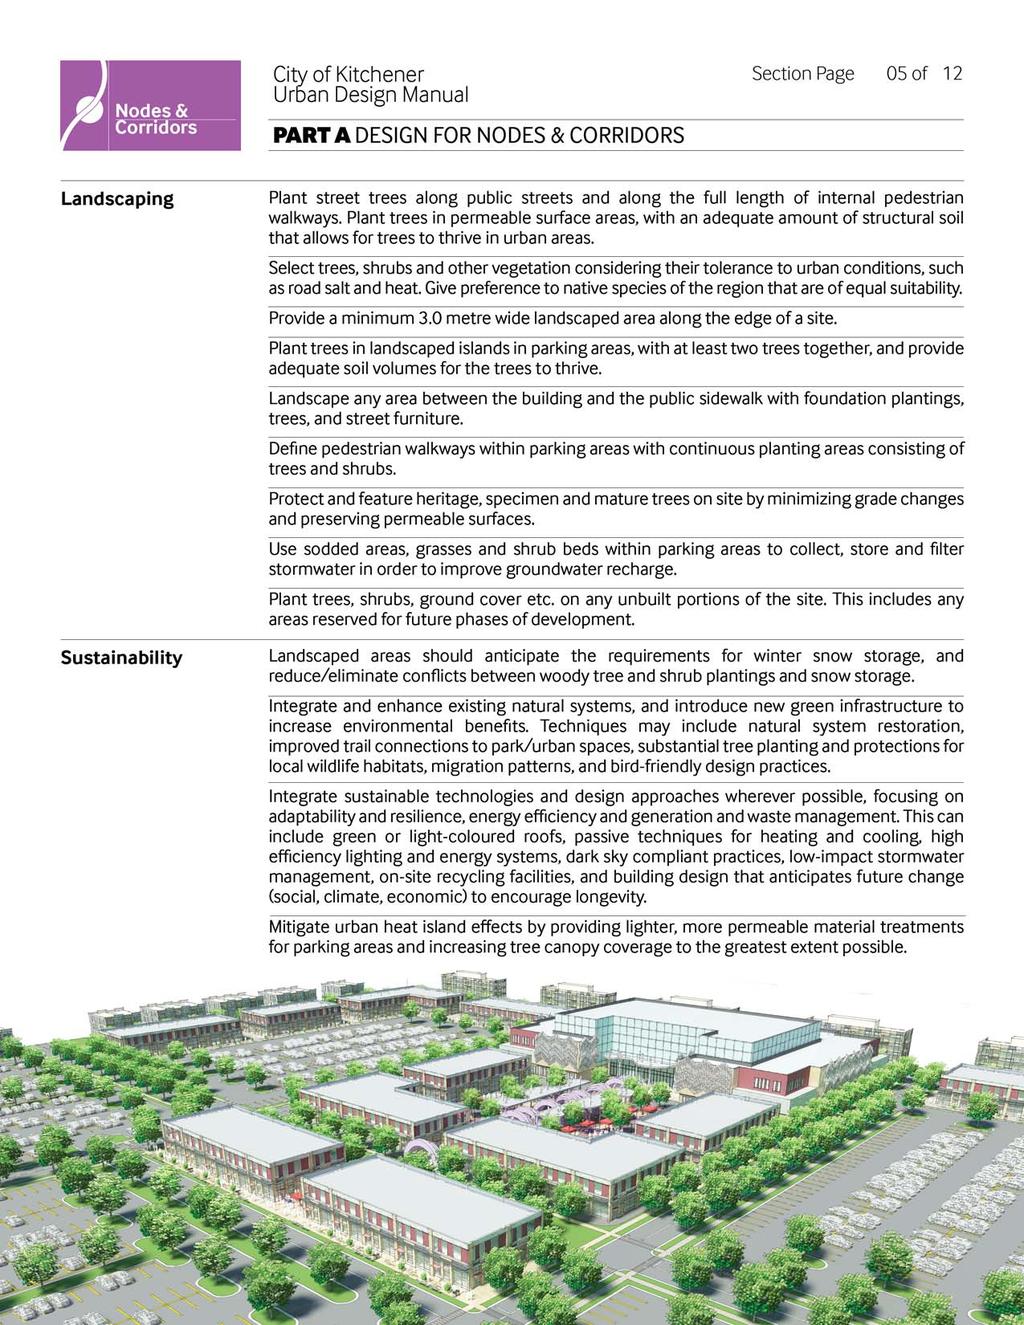 I I Nodes& Corrid~ Section Page 05 of 12 6 Landscaping Sustainability Plant street trees along public streets and along the full length of internal pedestrian walkways.